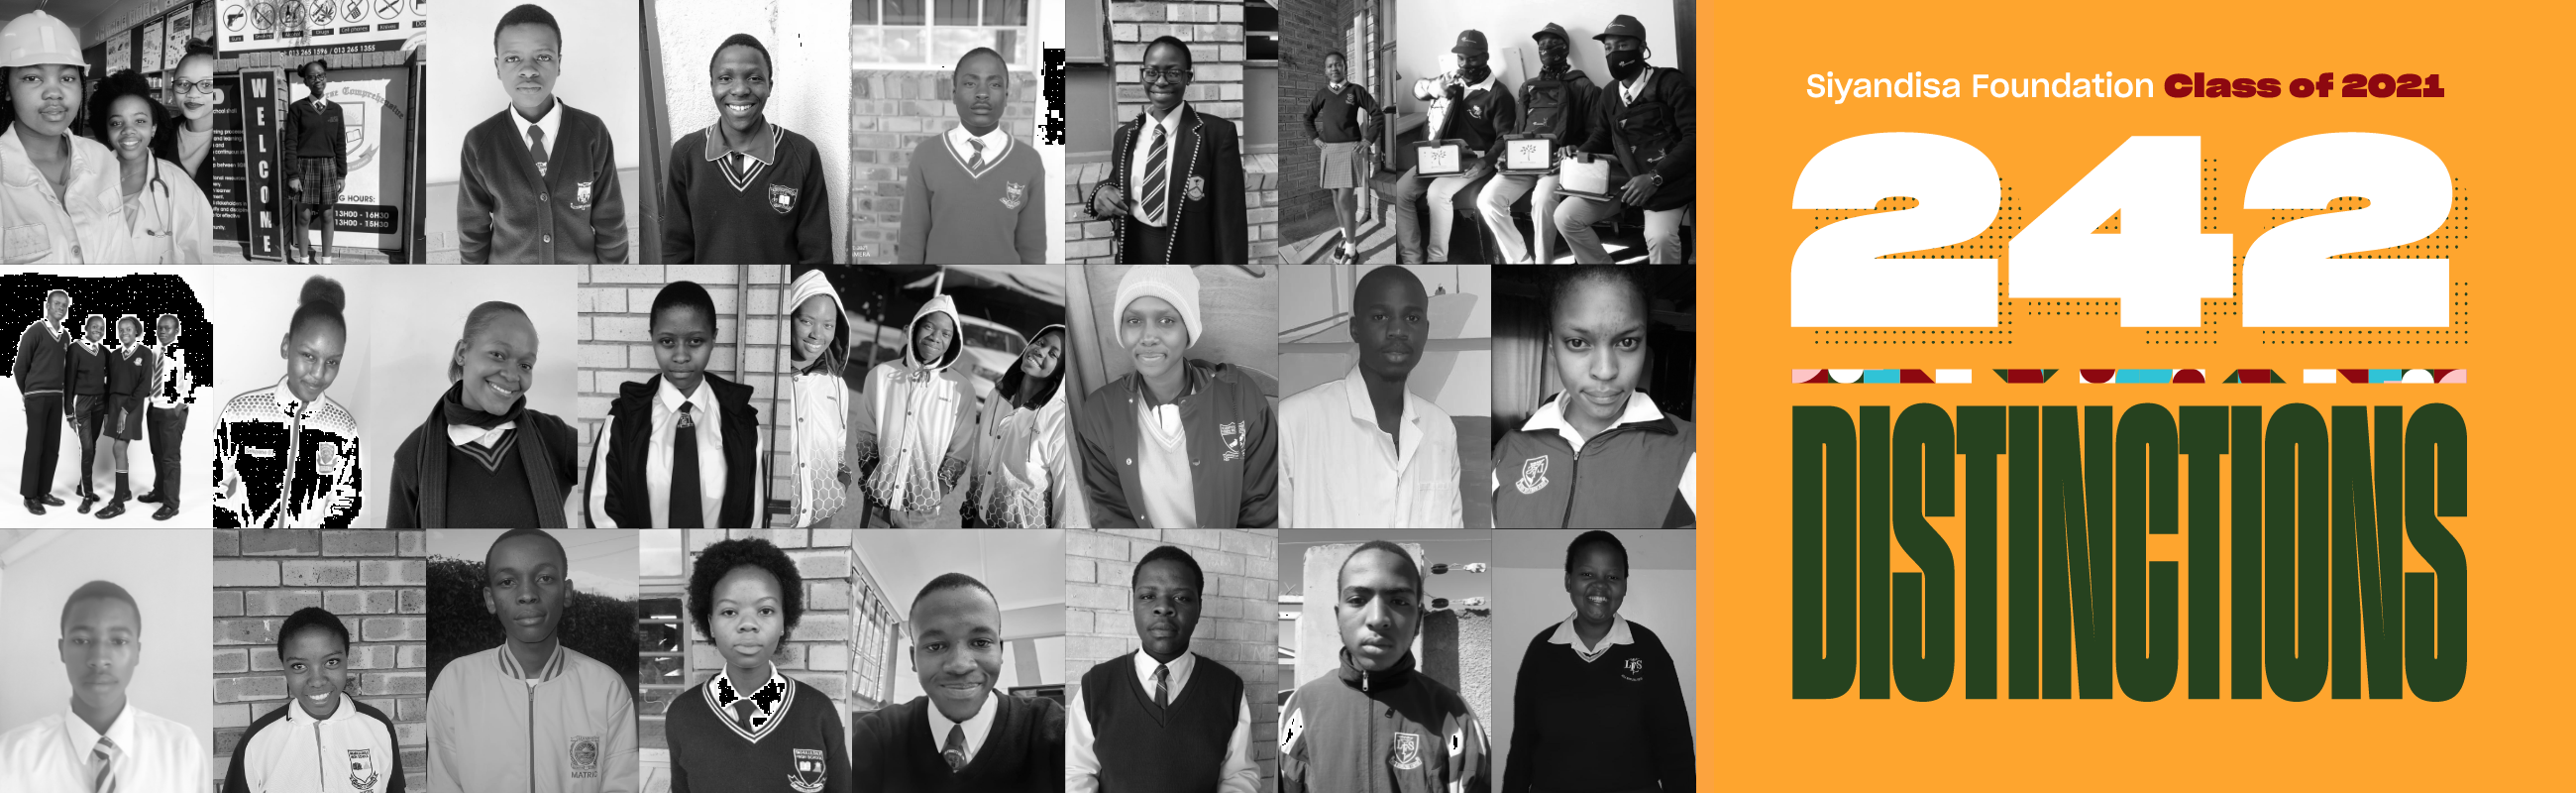 242 distinctions for the Siyandisa Foundation Class of 2021!